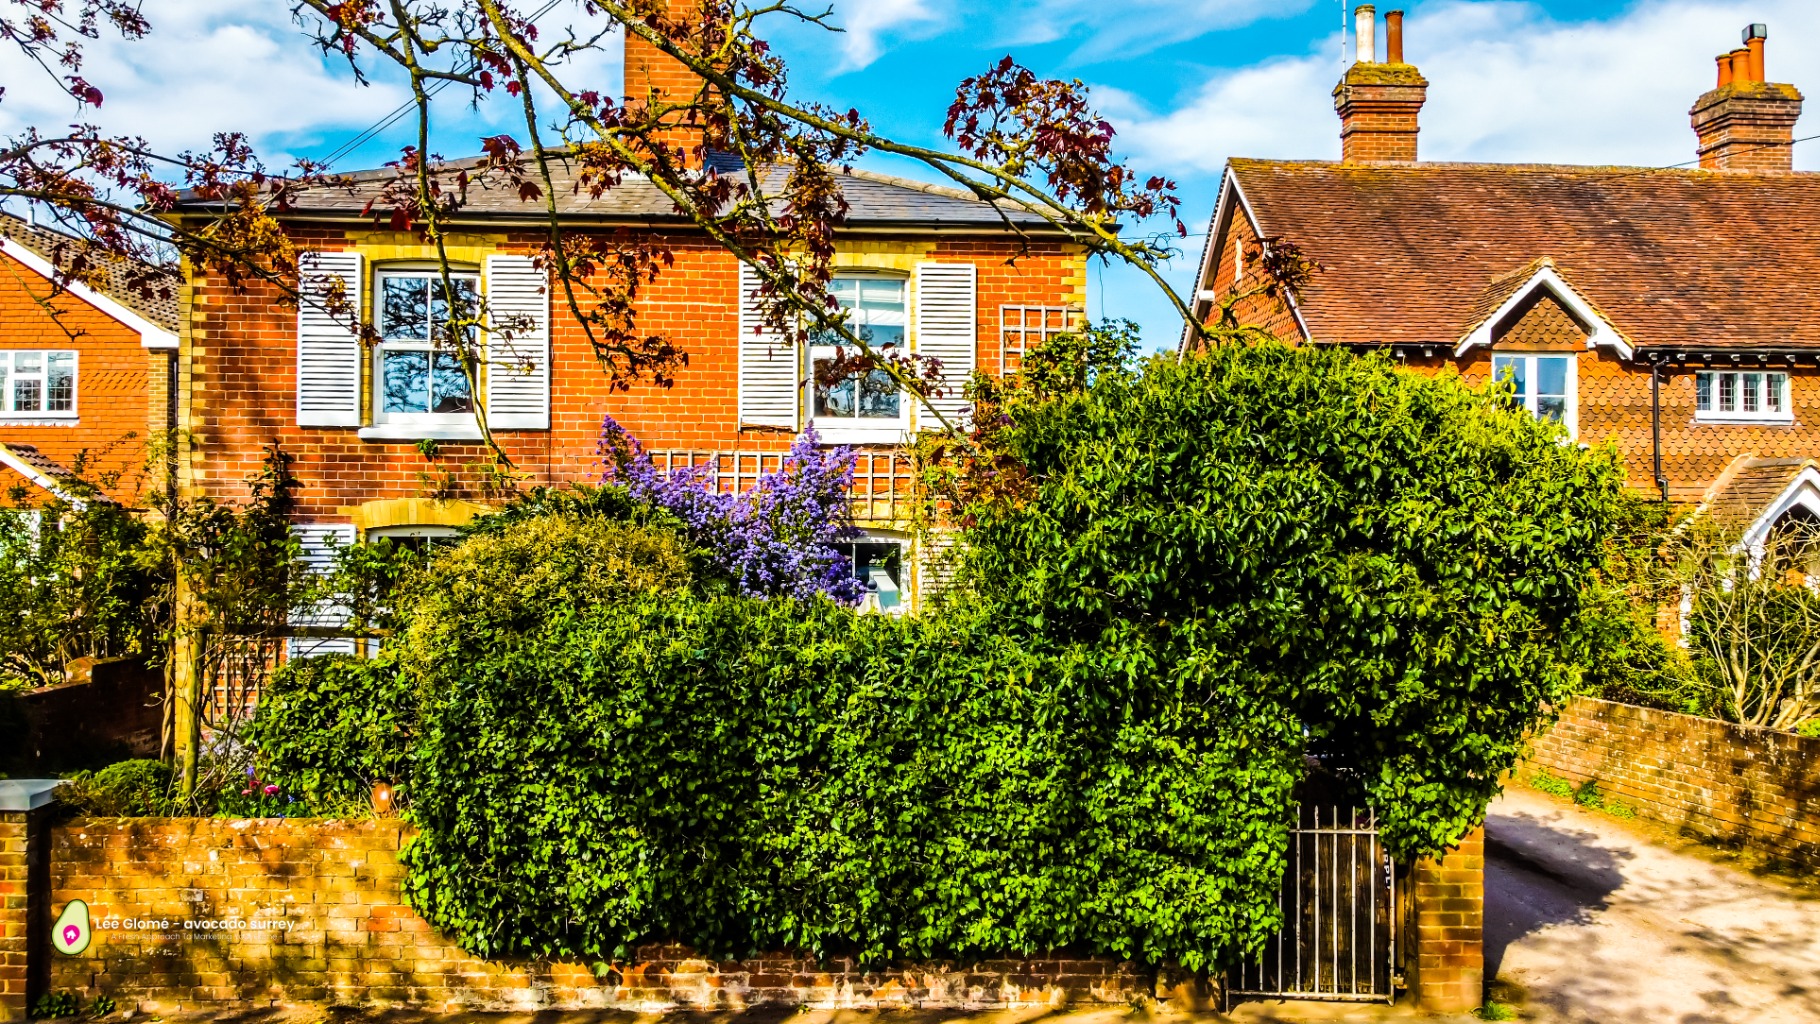 This pretty Two bedroom Victorian semi-detached cottage is set on Cranleigh Common and within a stones throw of Cranleigh High Street with all the local amenities on your doorstep. Offering a great sized open-planned refitted Kitchen/diner, cozy lounge with wood burner, Courtyard garden to the front